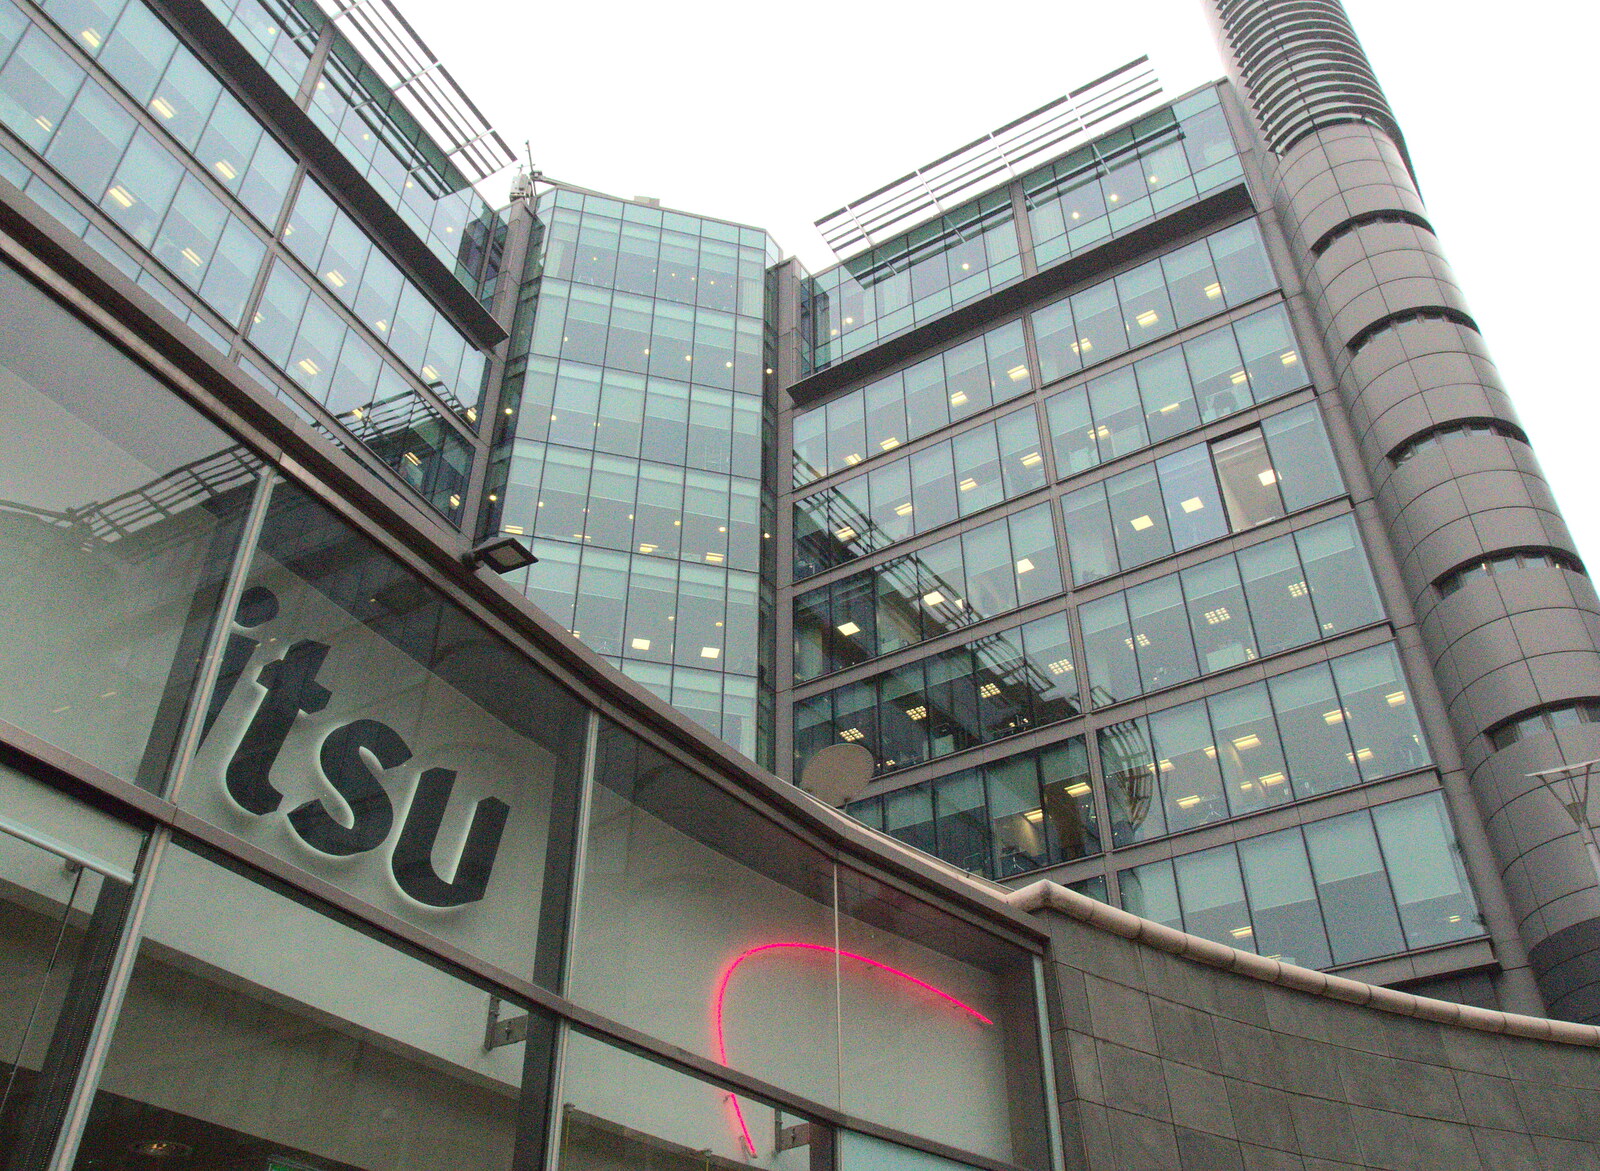 Itsu and office buildings from Grandad's Fire and SwiftKey Moves Offices, Eye and Paddington - 23rd January 2017